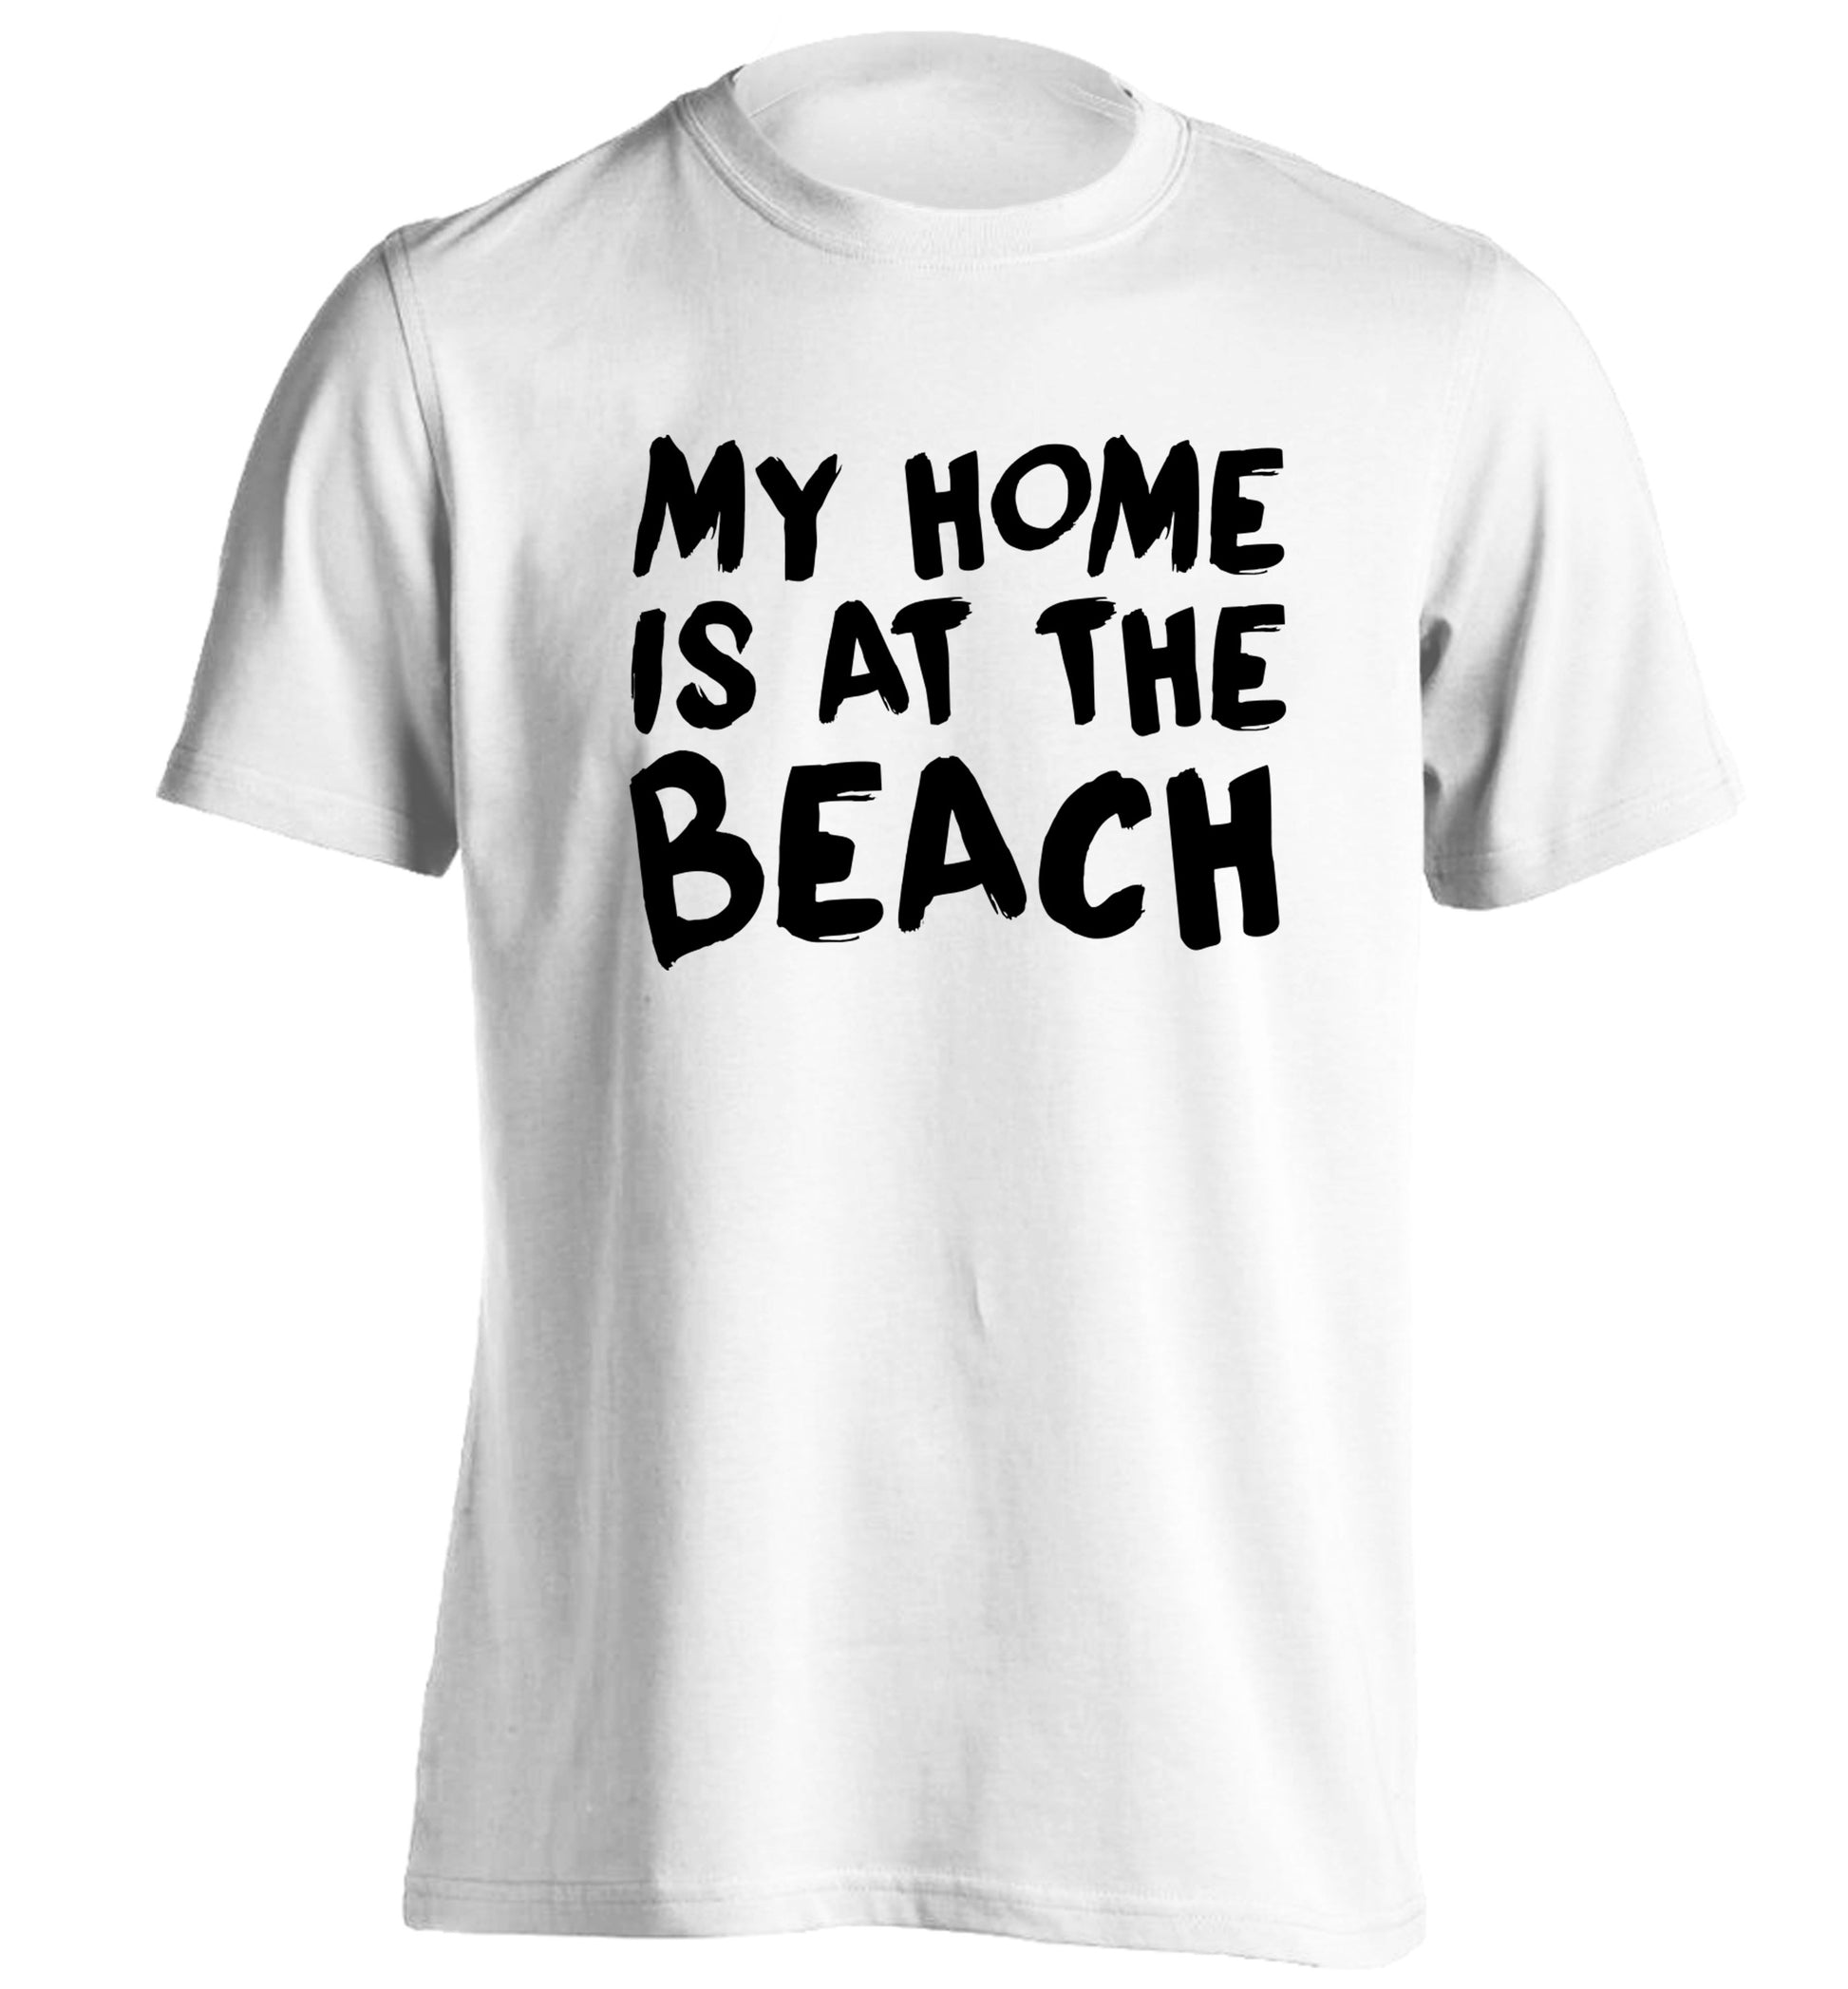 My home is at the beach adults unisex white Tshirt 2XL